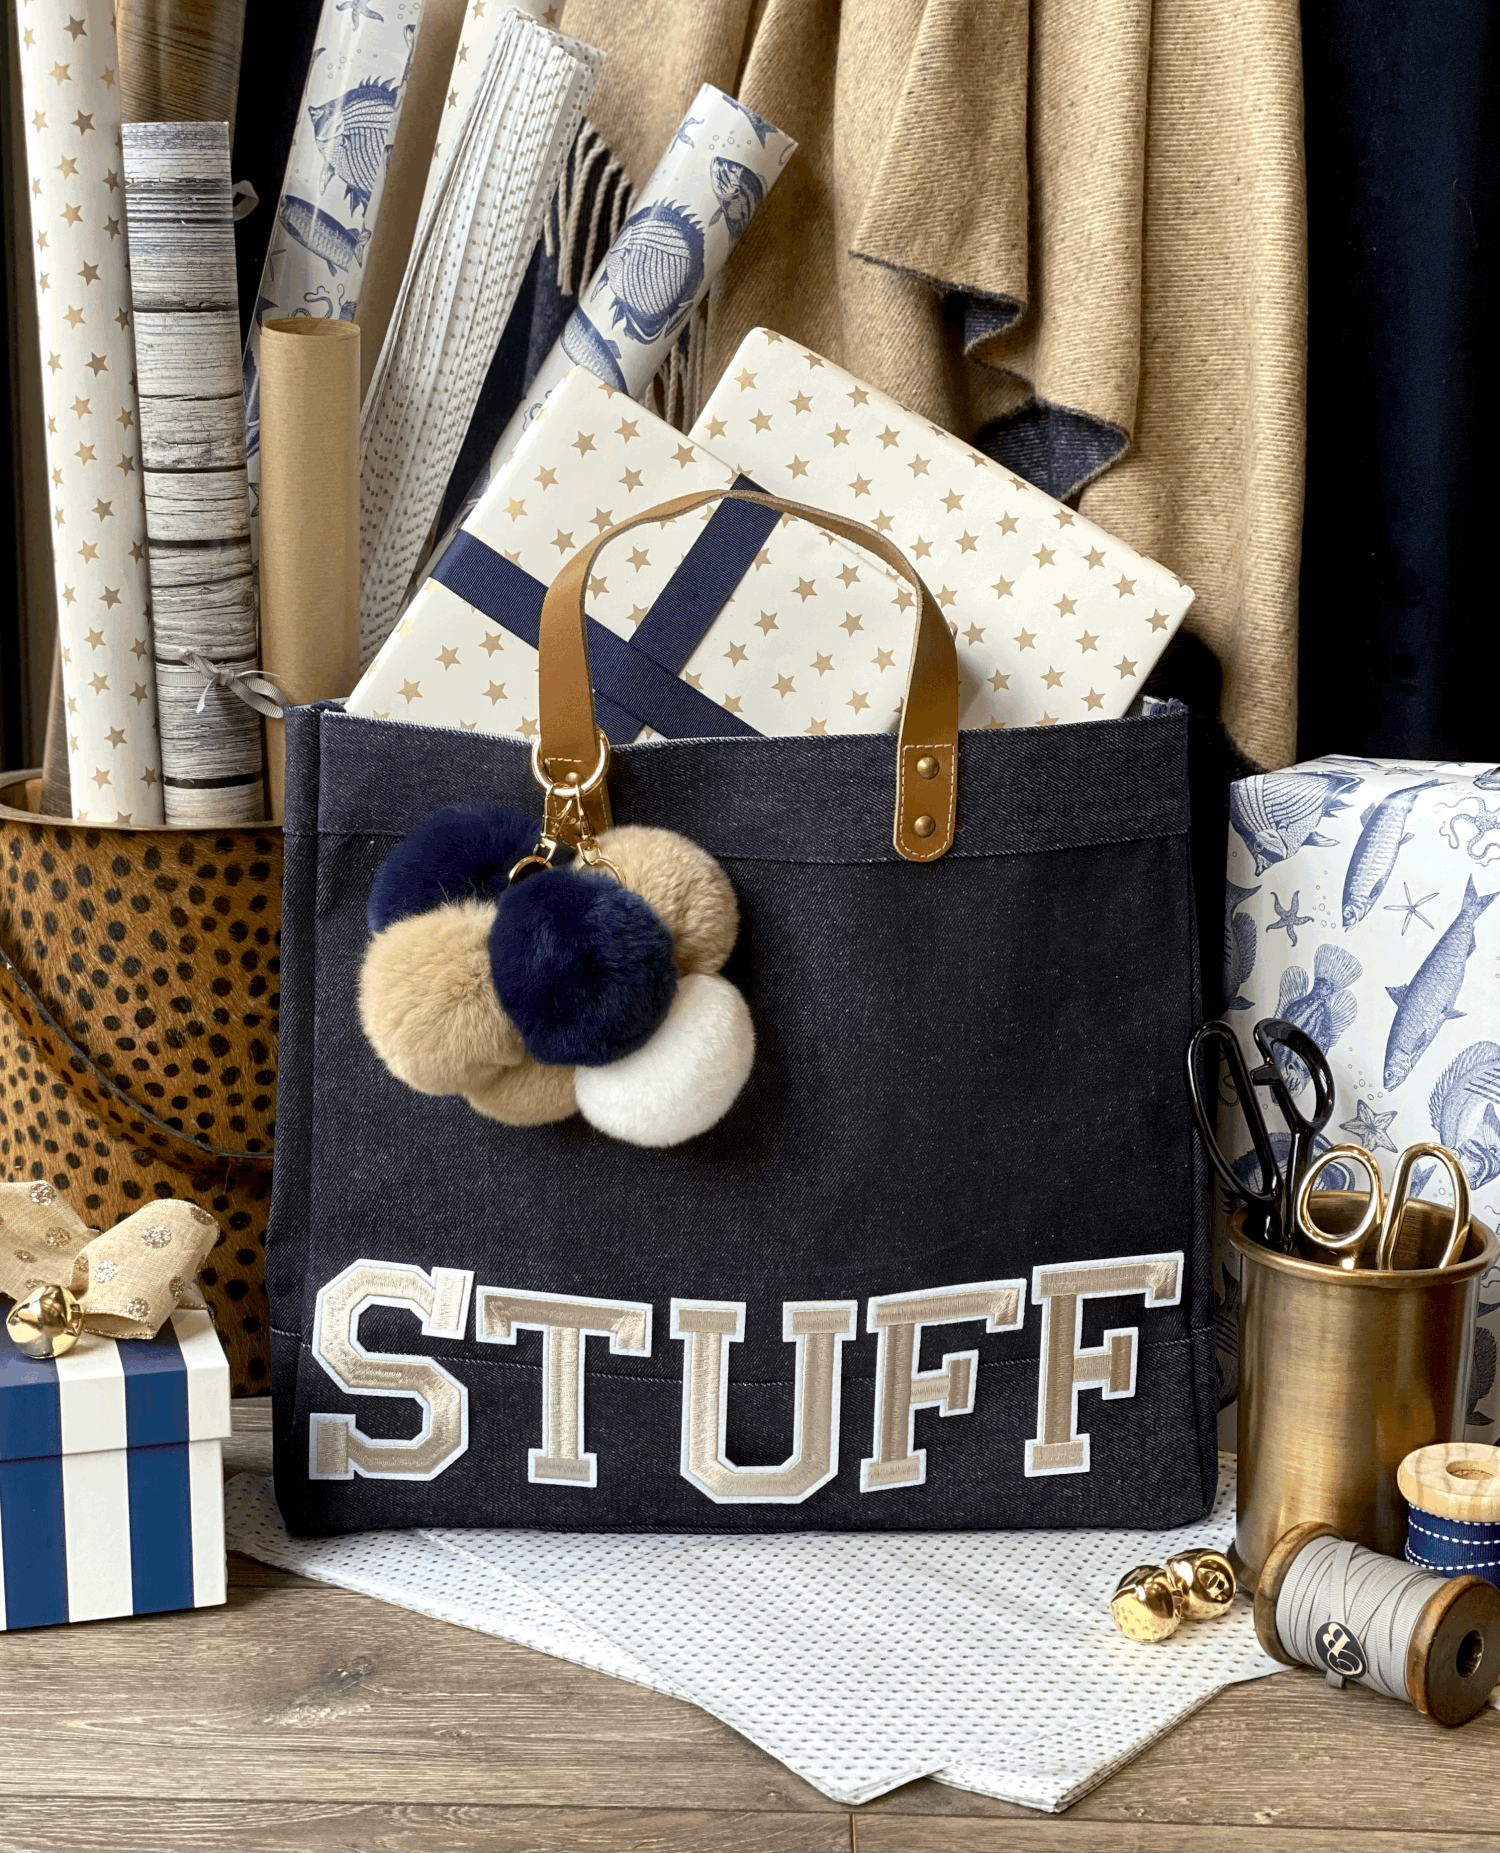 THE CLASSIC DENIM TOTE BAG — ONLY BLUE LIVING